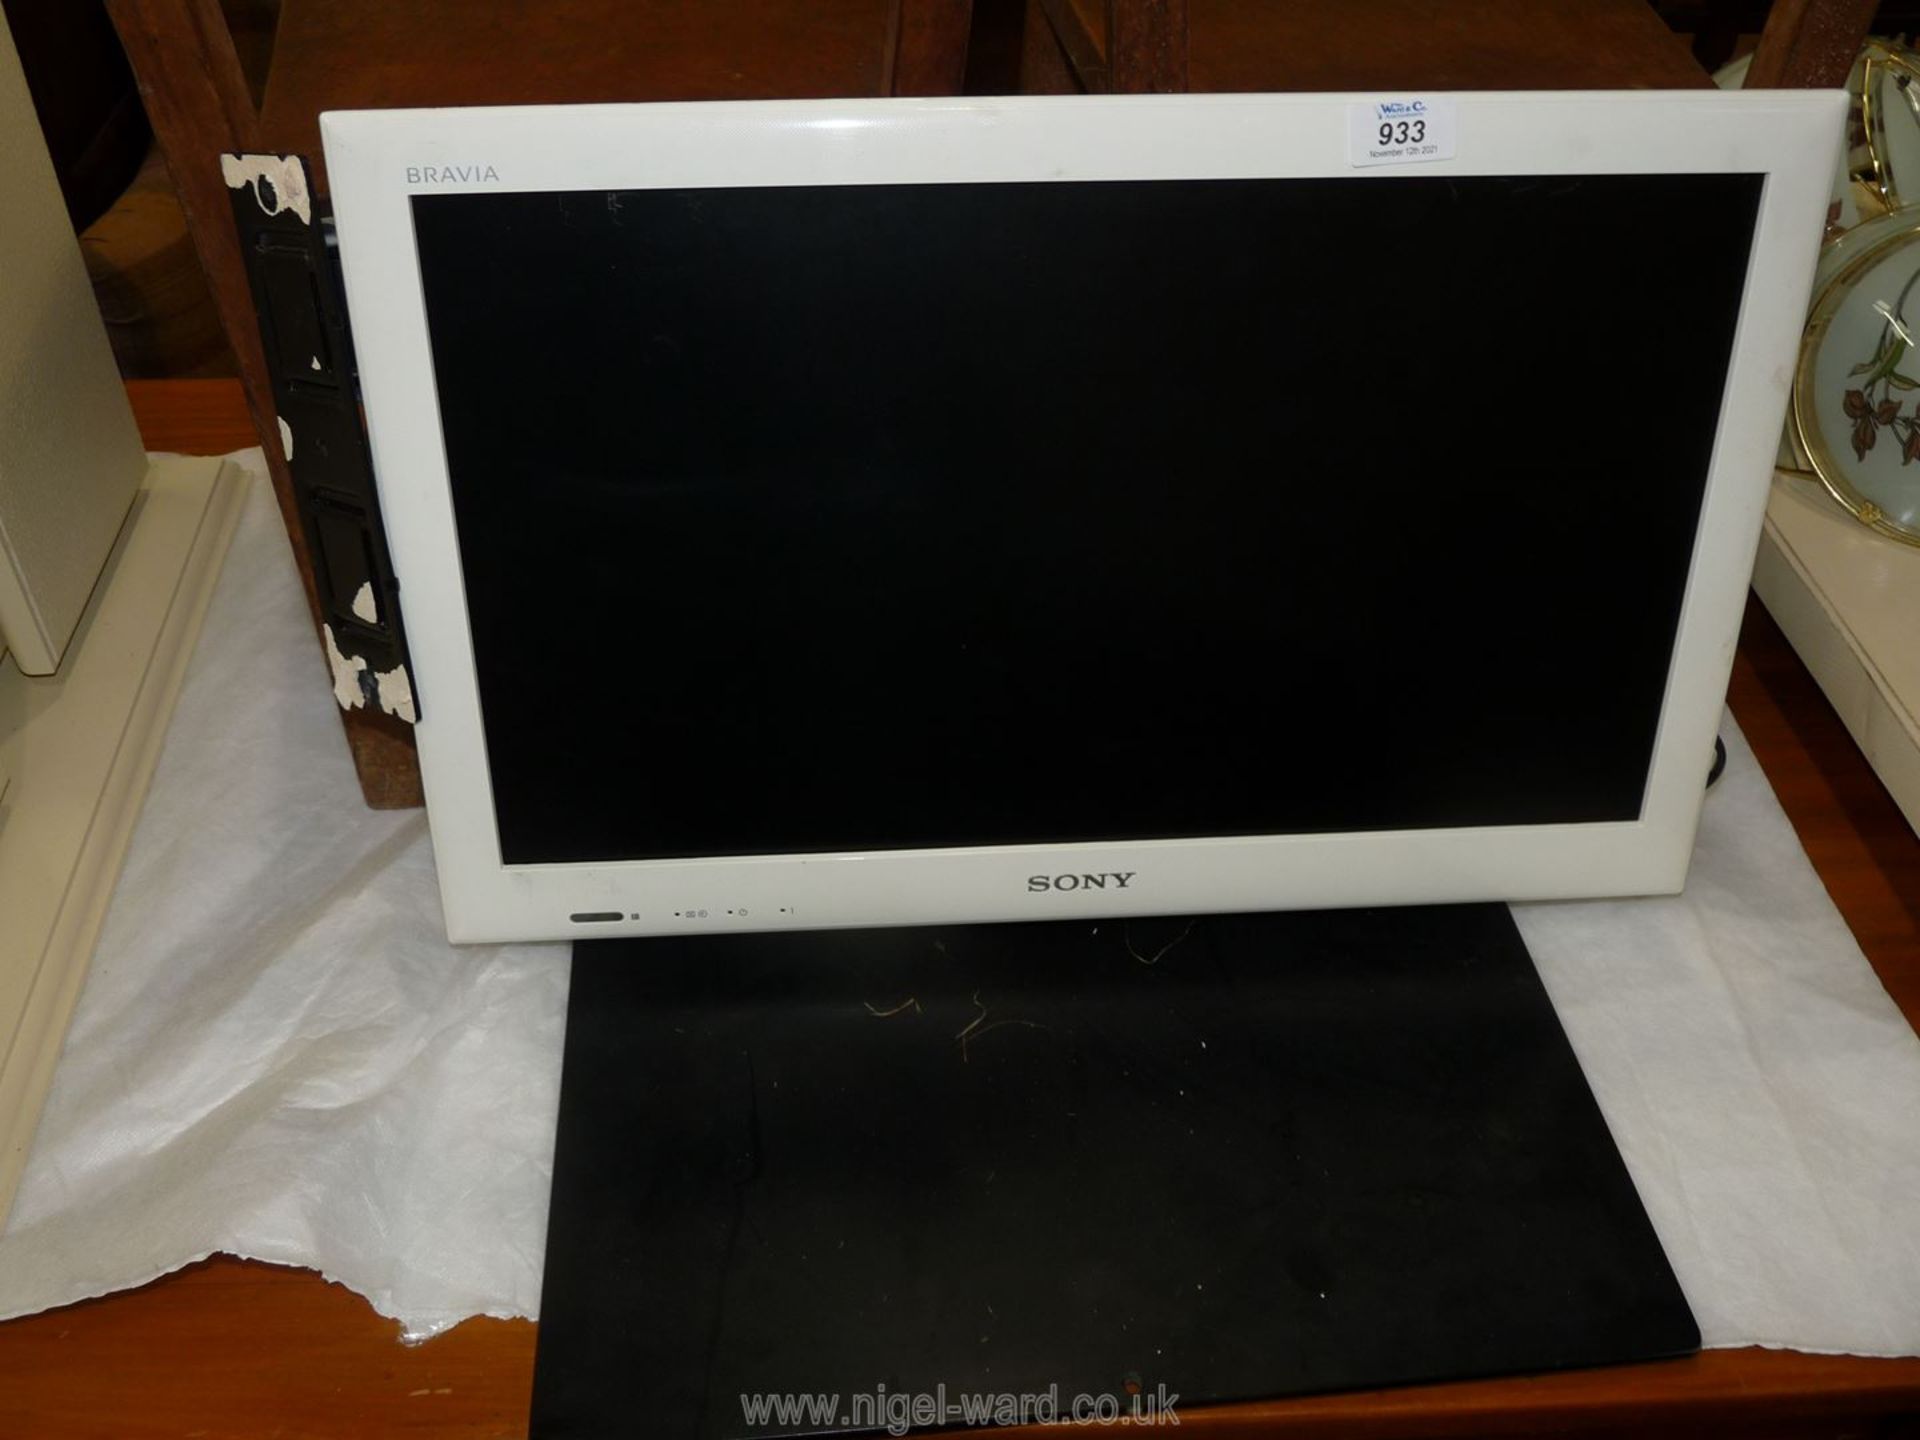 A Sony flat screen TV, 22" screen with wall bracket attached.